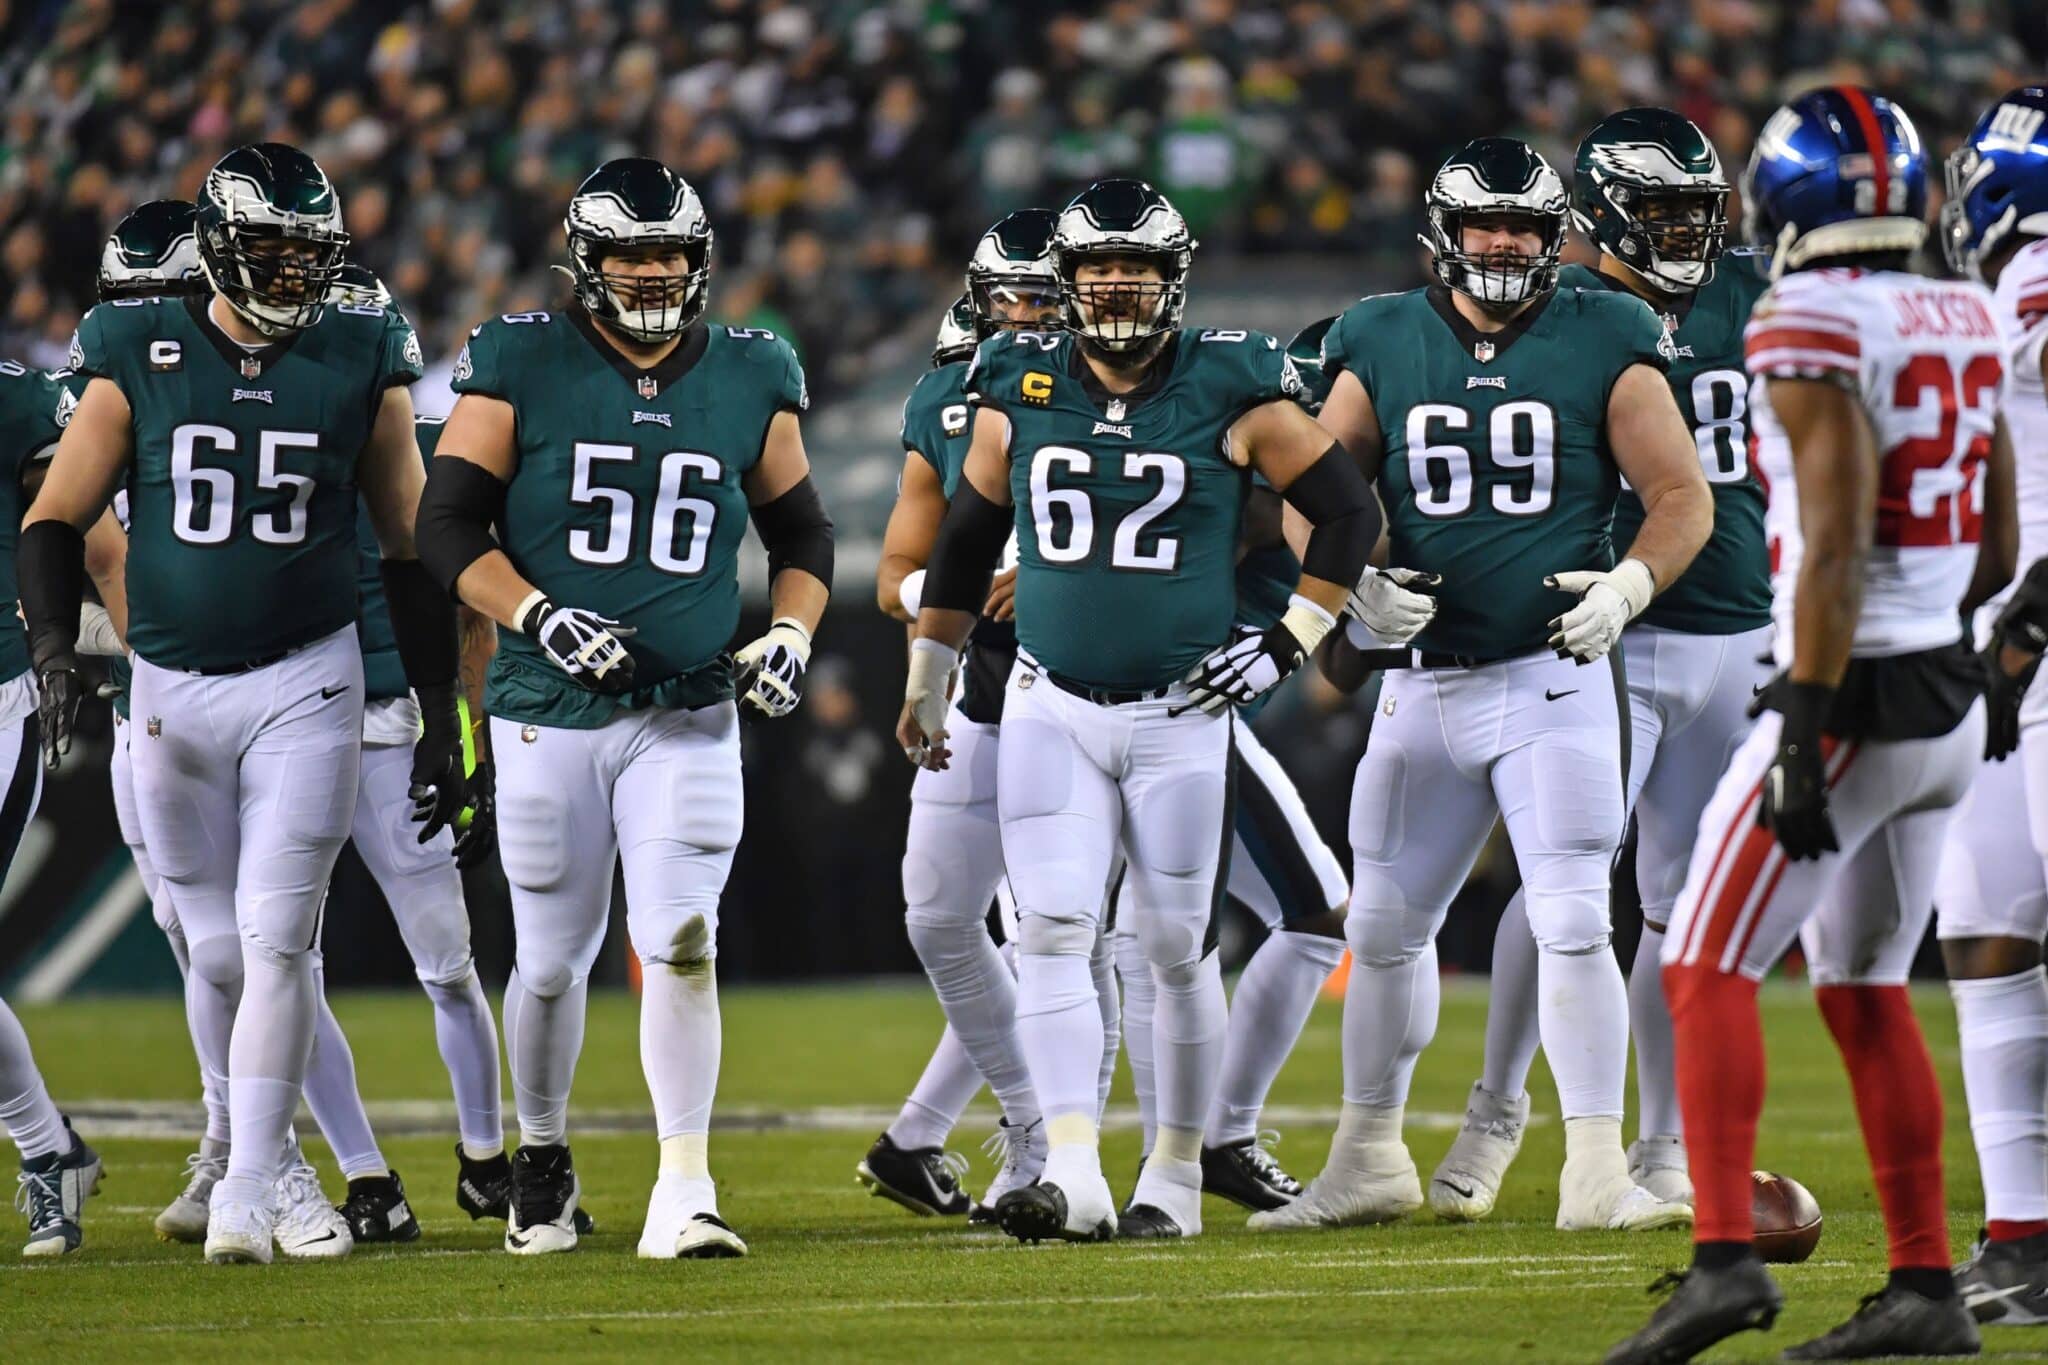 The Eagles are Better than the Chiefs in the Trenches